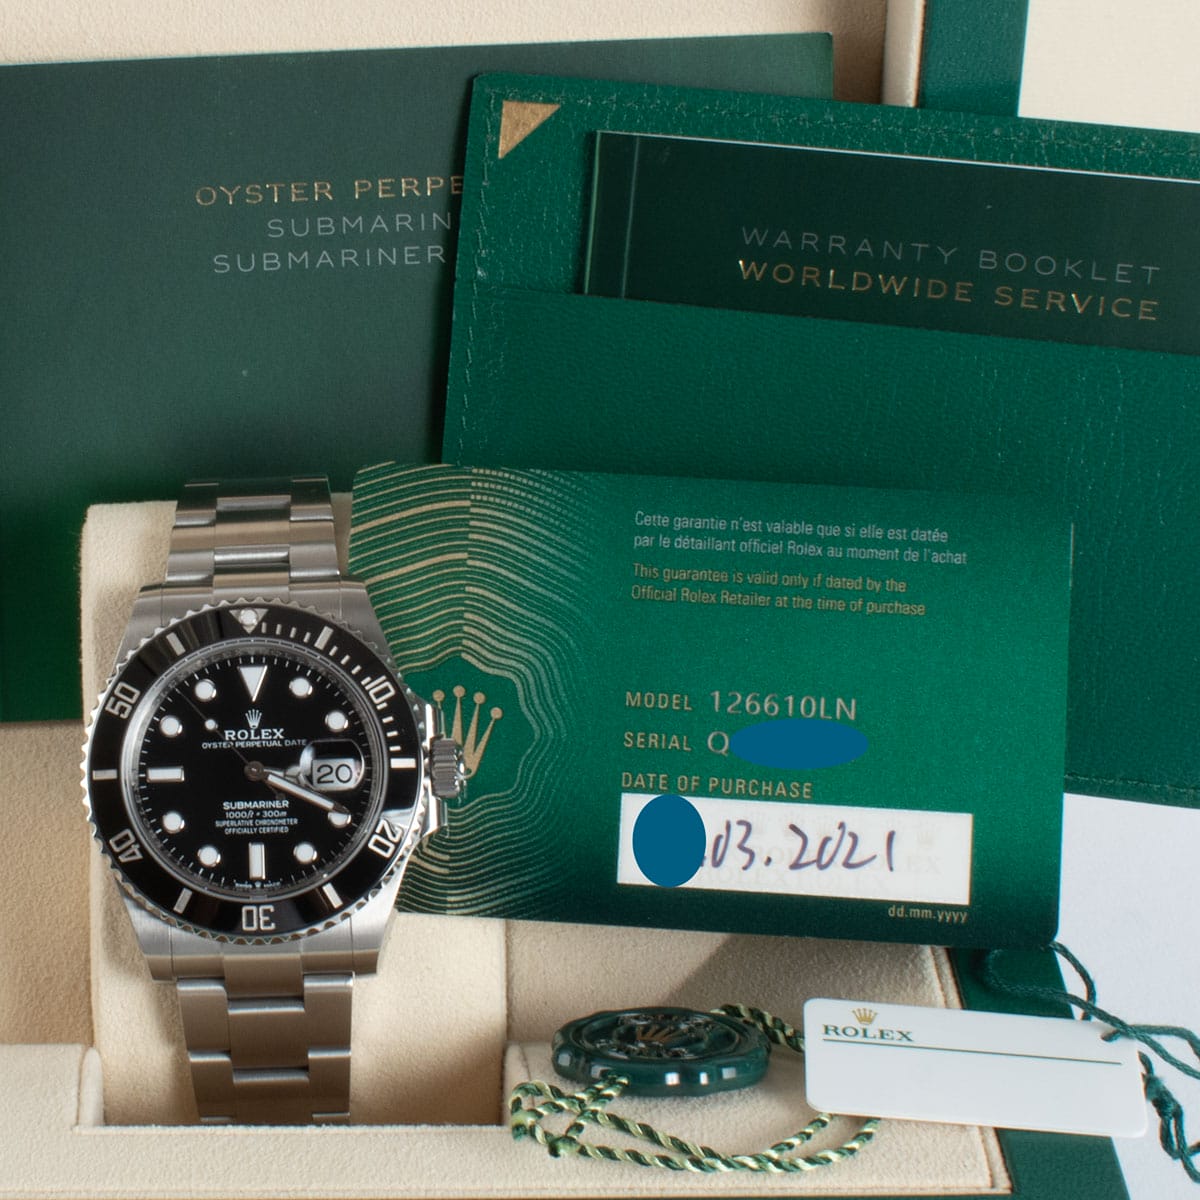 View in Box of Submariner Date 41